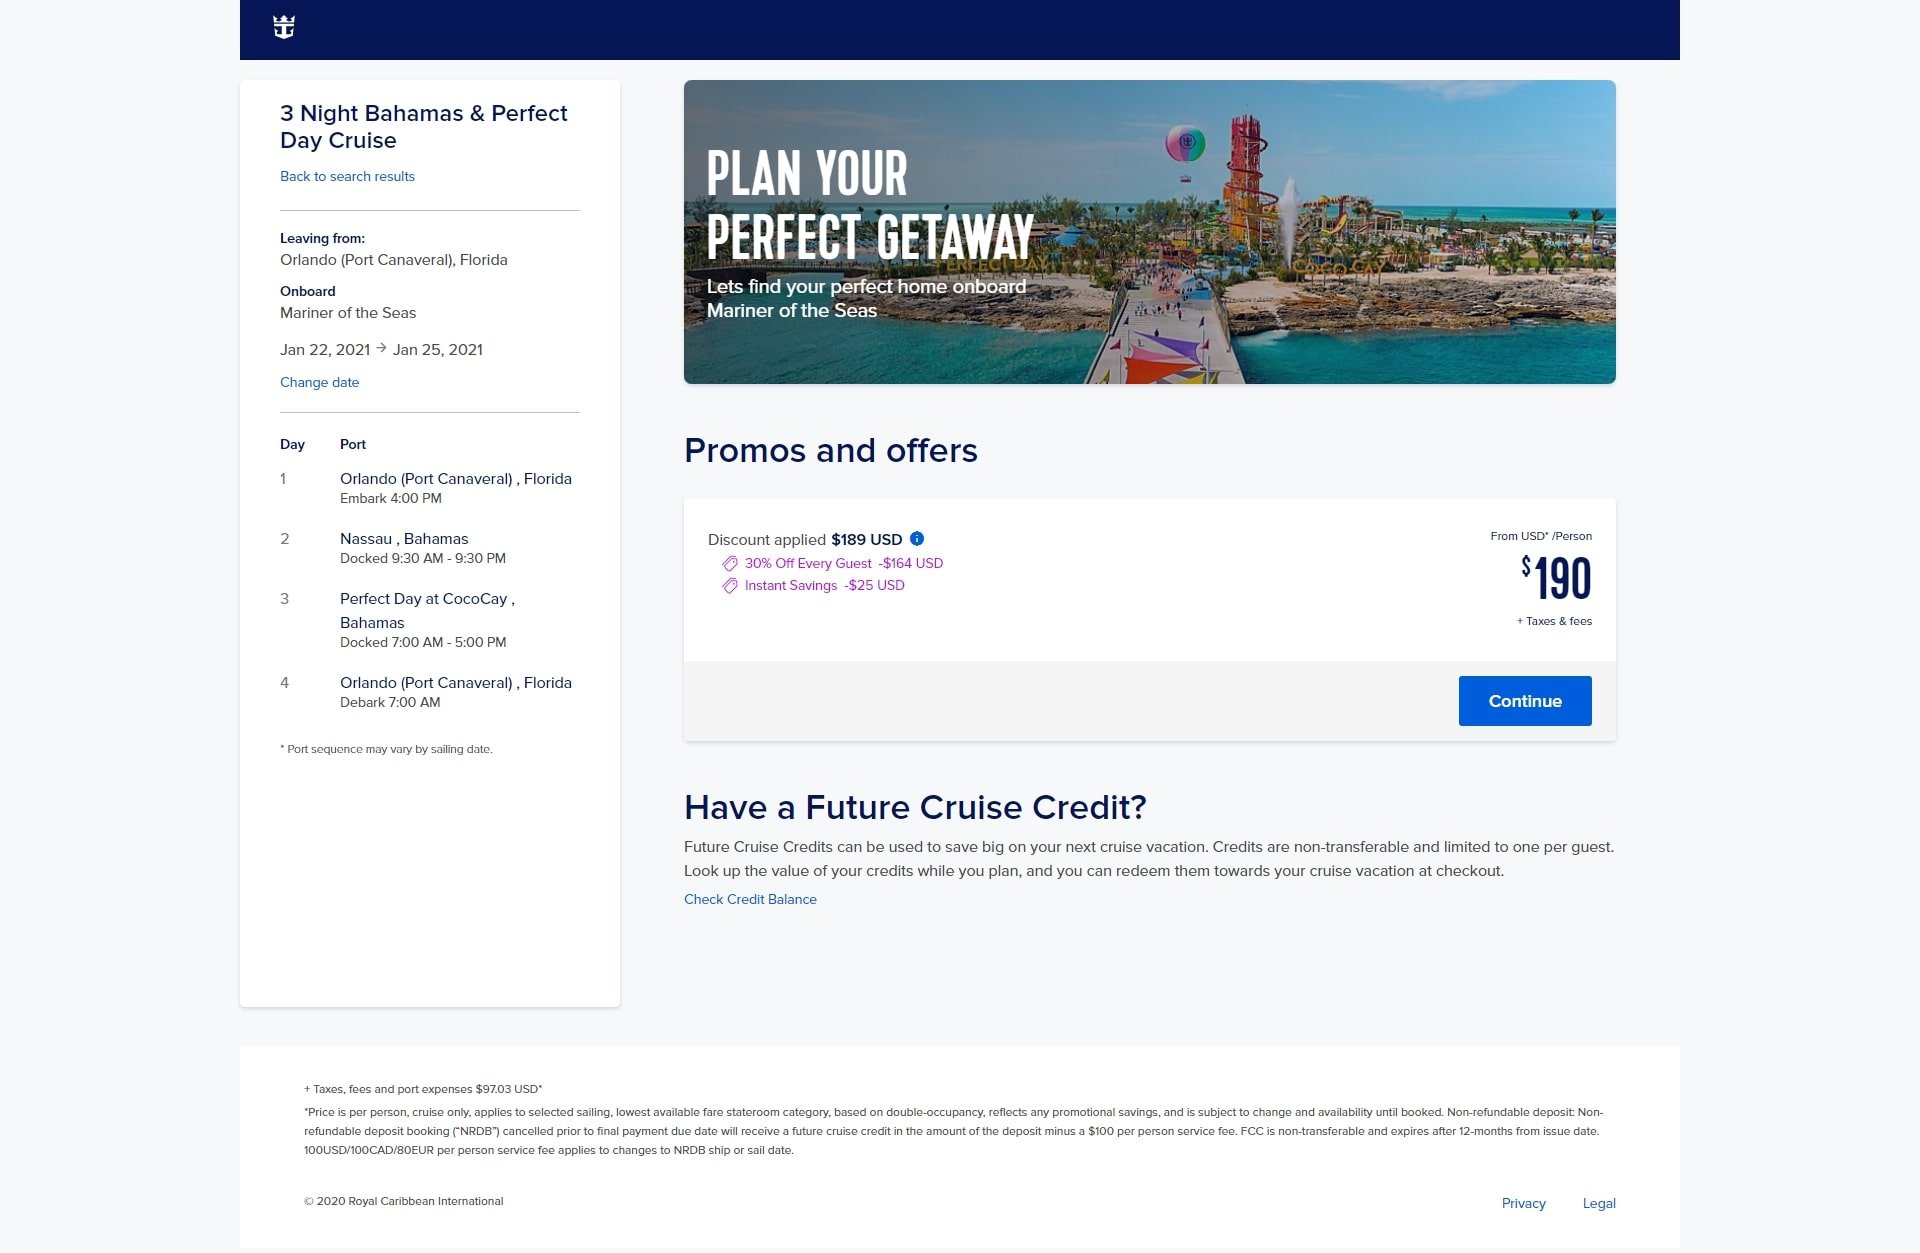 Royal Caribbean updates cruise booking website with cleaner design | Royal Caribbean Blog